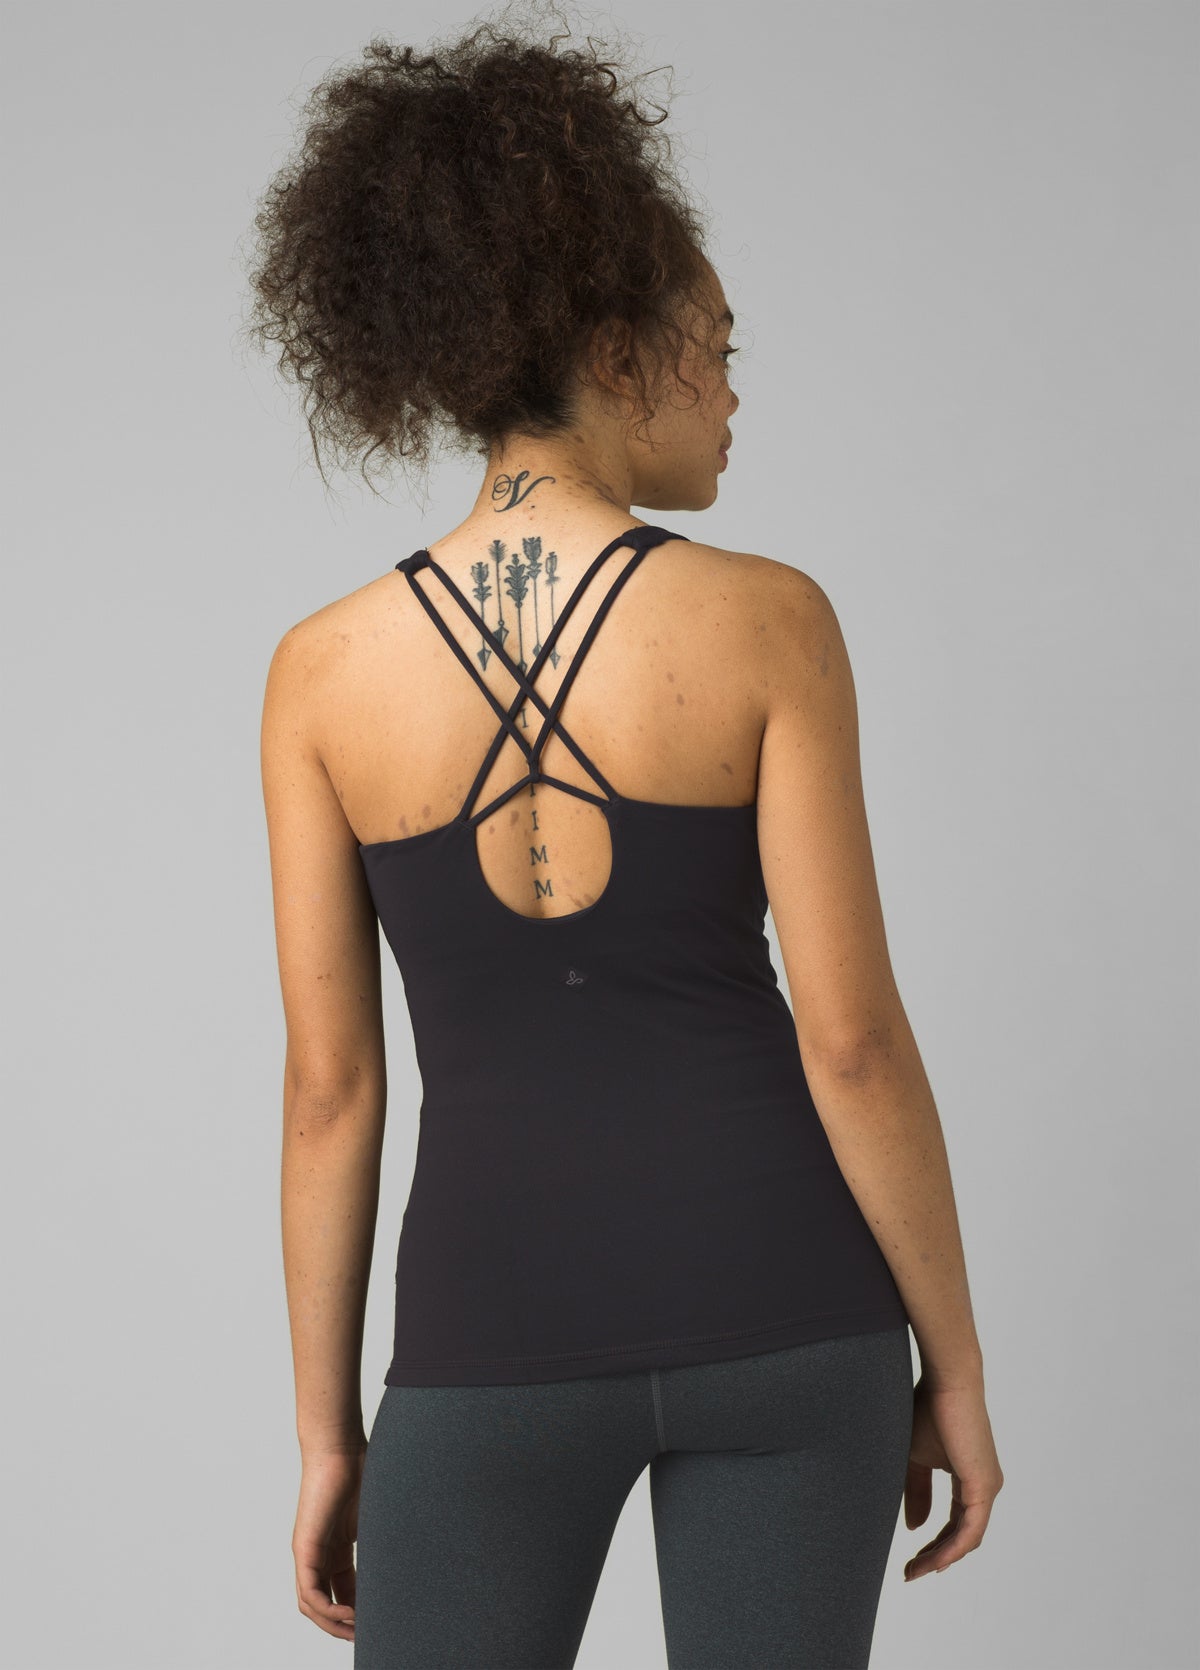 NEW prAna SILVER WATERFALL STRAPPY RACERBACK WORKOUT TANK TOP